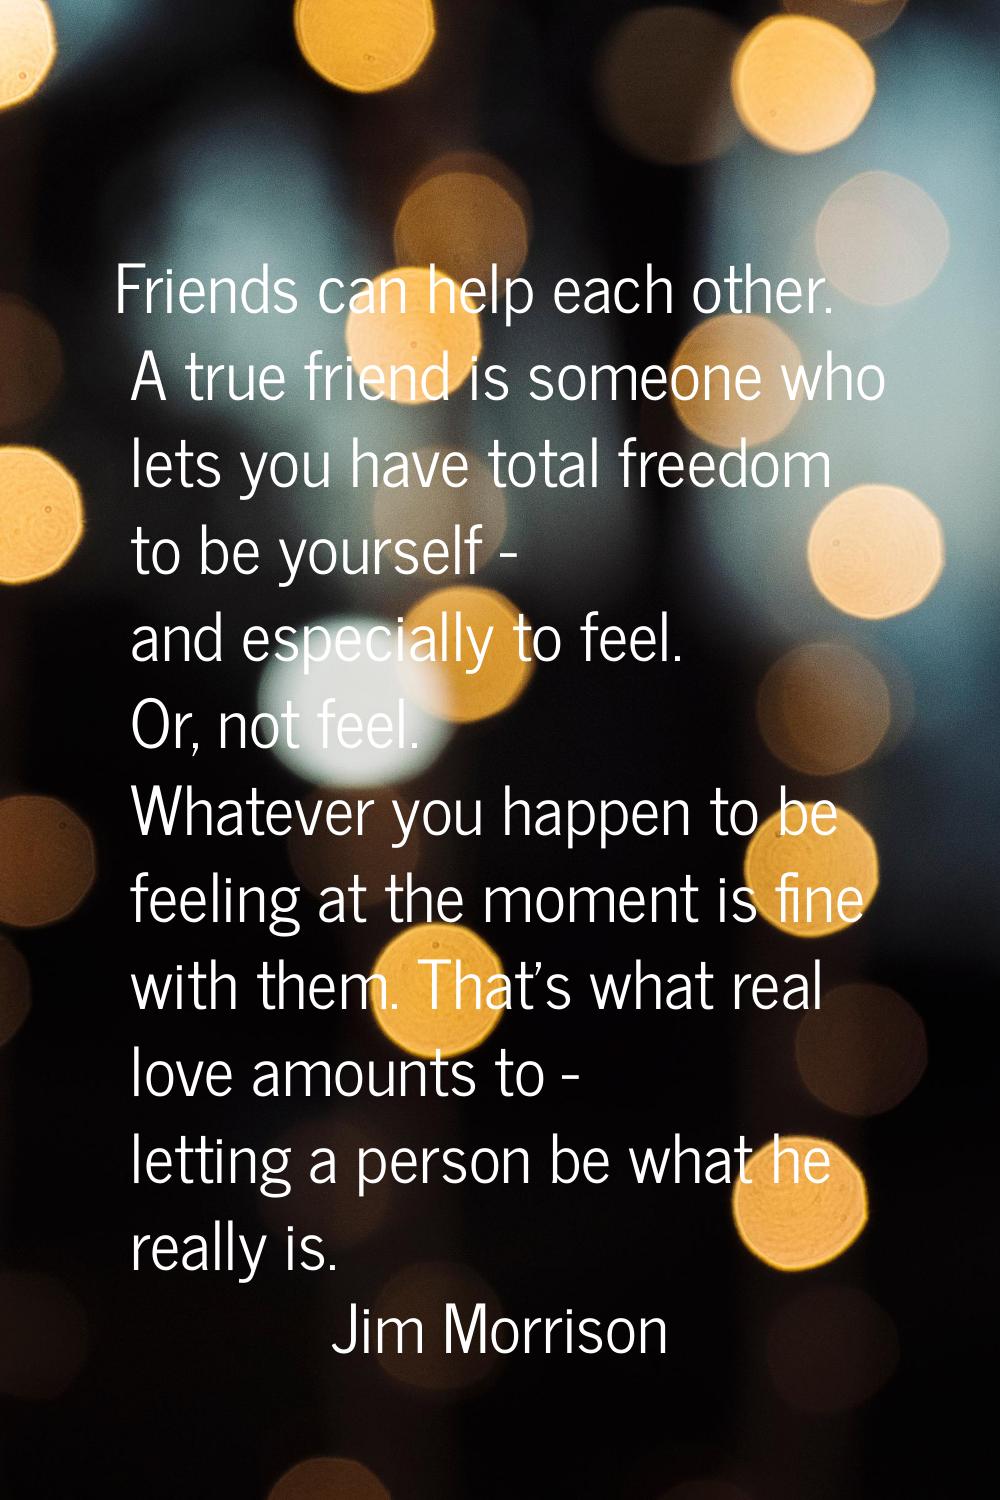 Friends can help each other. A true friend is someone who lets you have total freedom to be yoursel